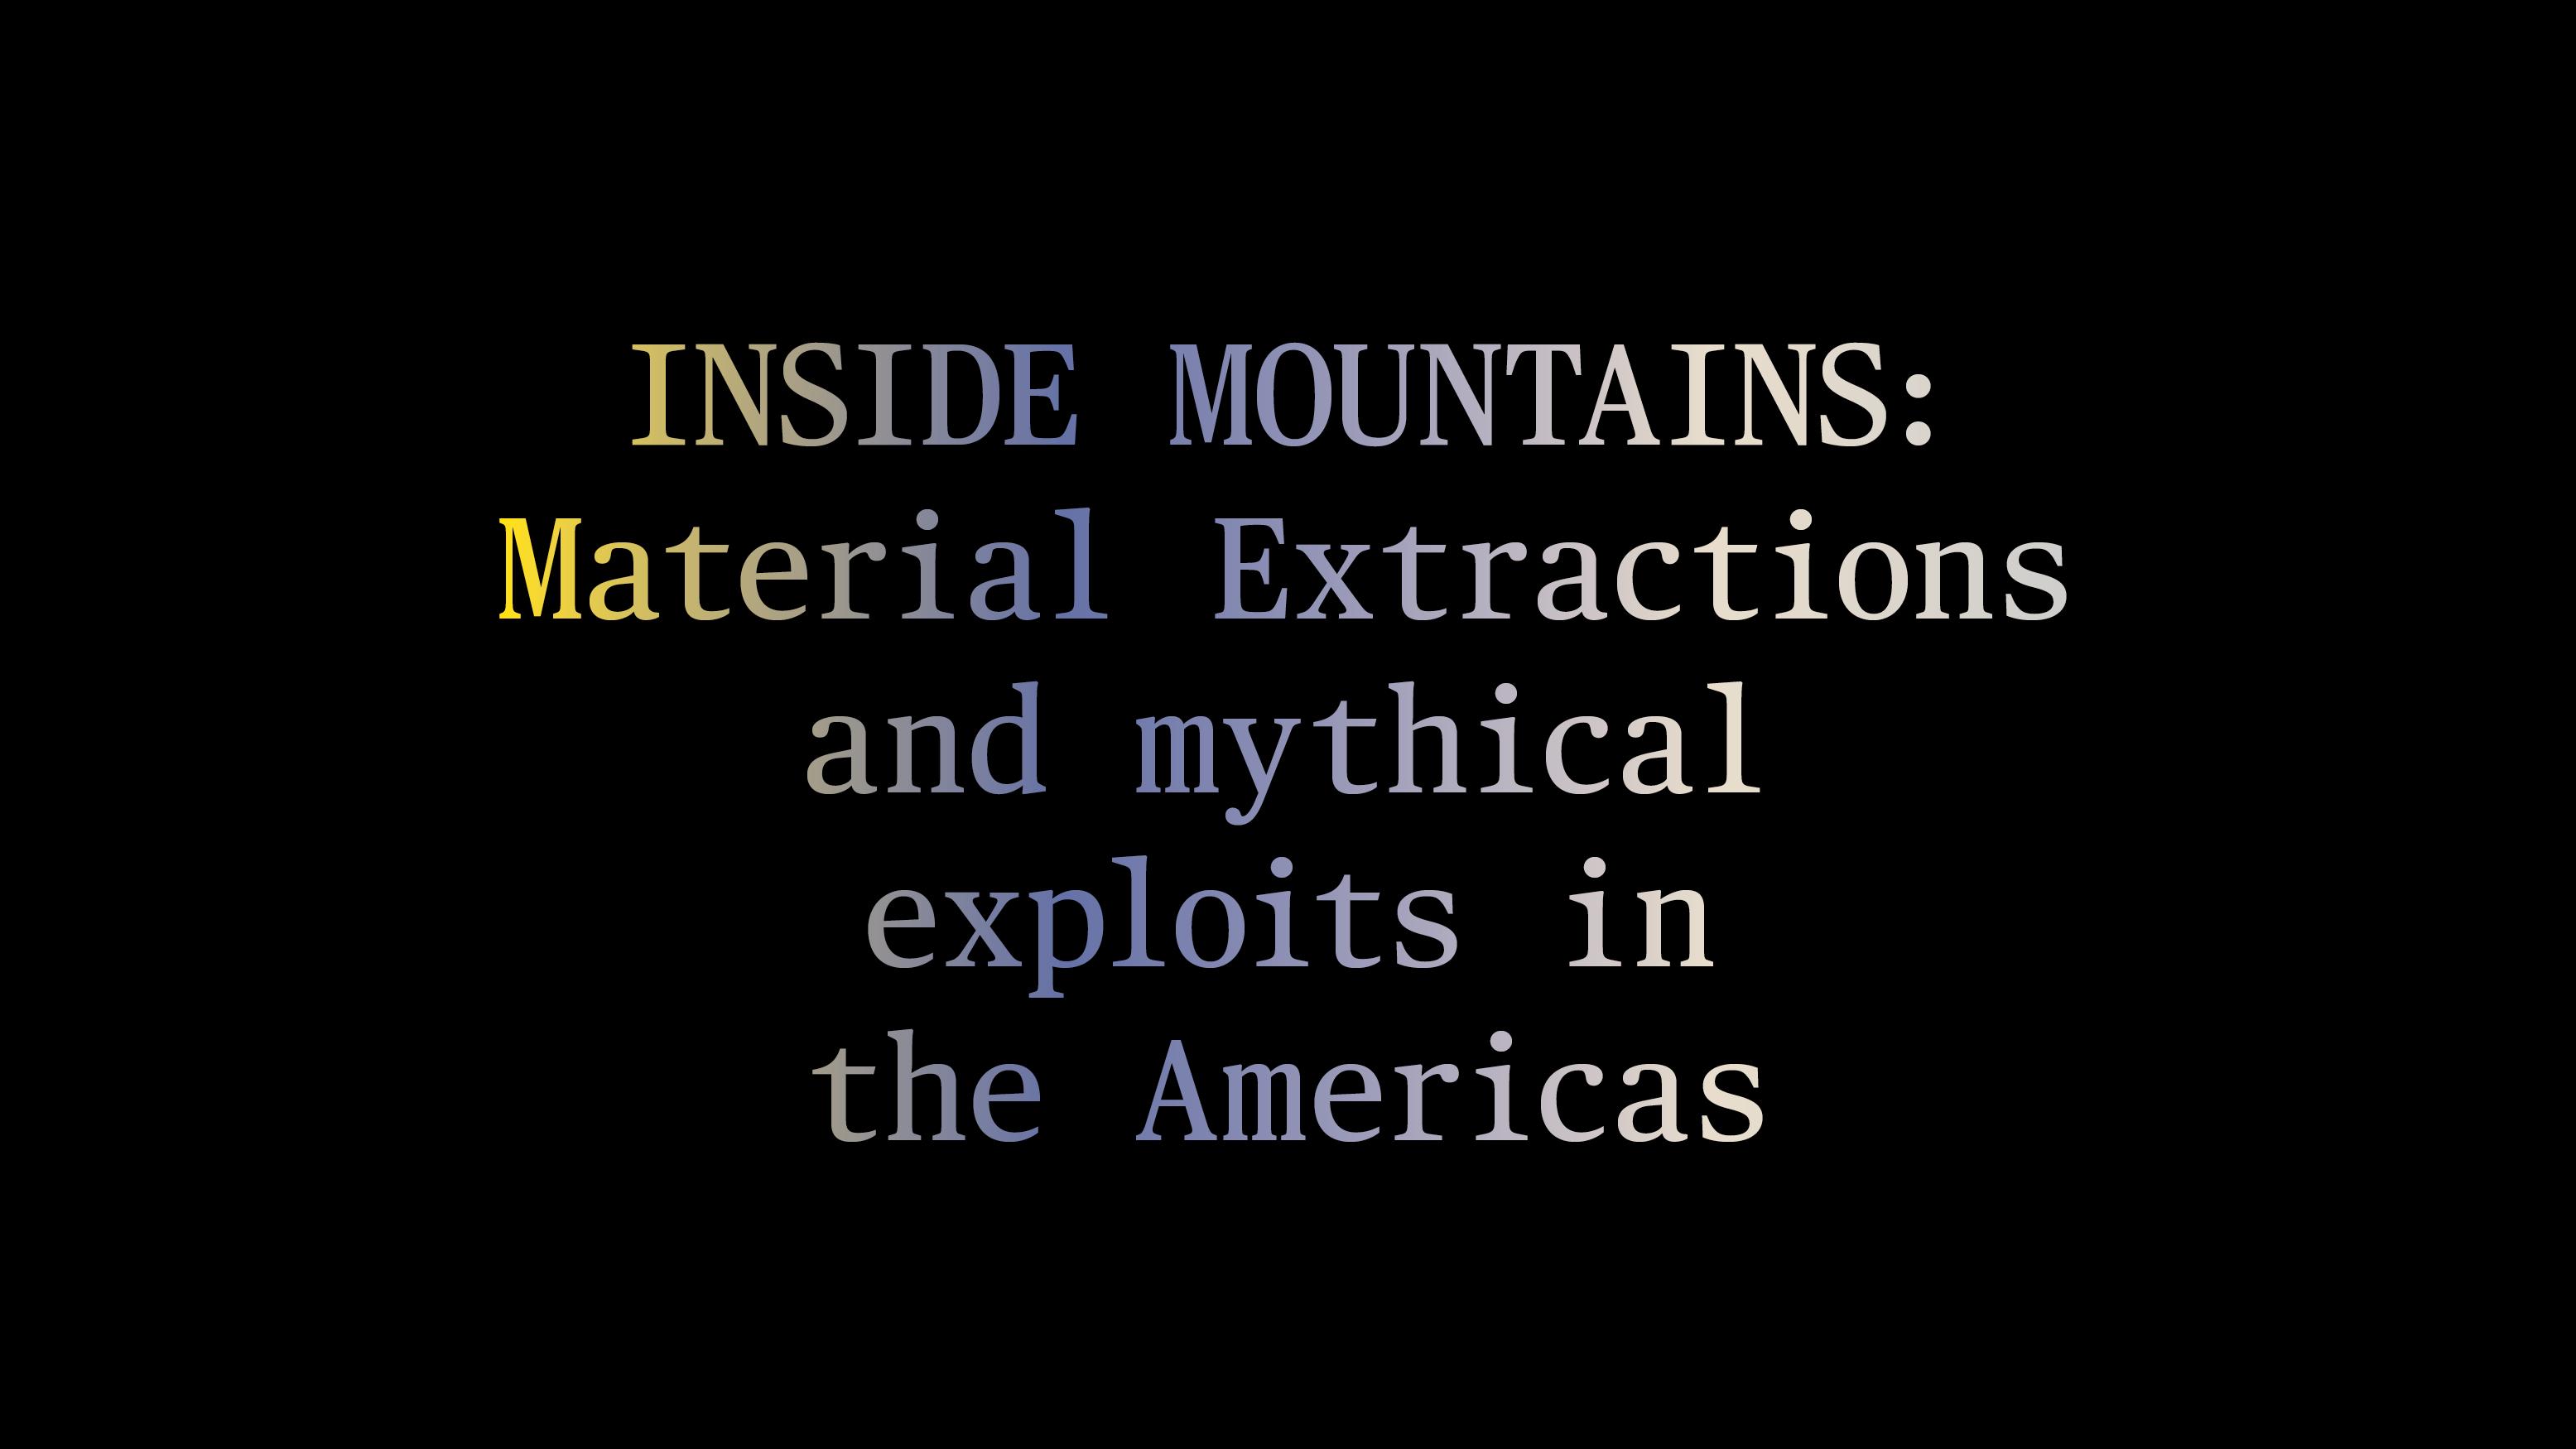 ZIAS-VORTRAGSREIHE: INSIDE MOUNTAINS - Material Extractions and mythical exploits in the Americas